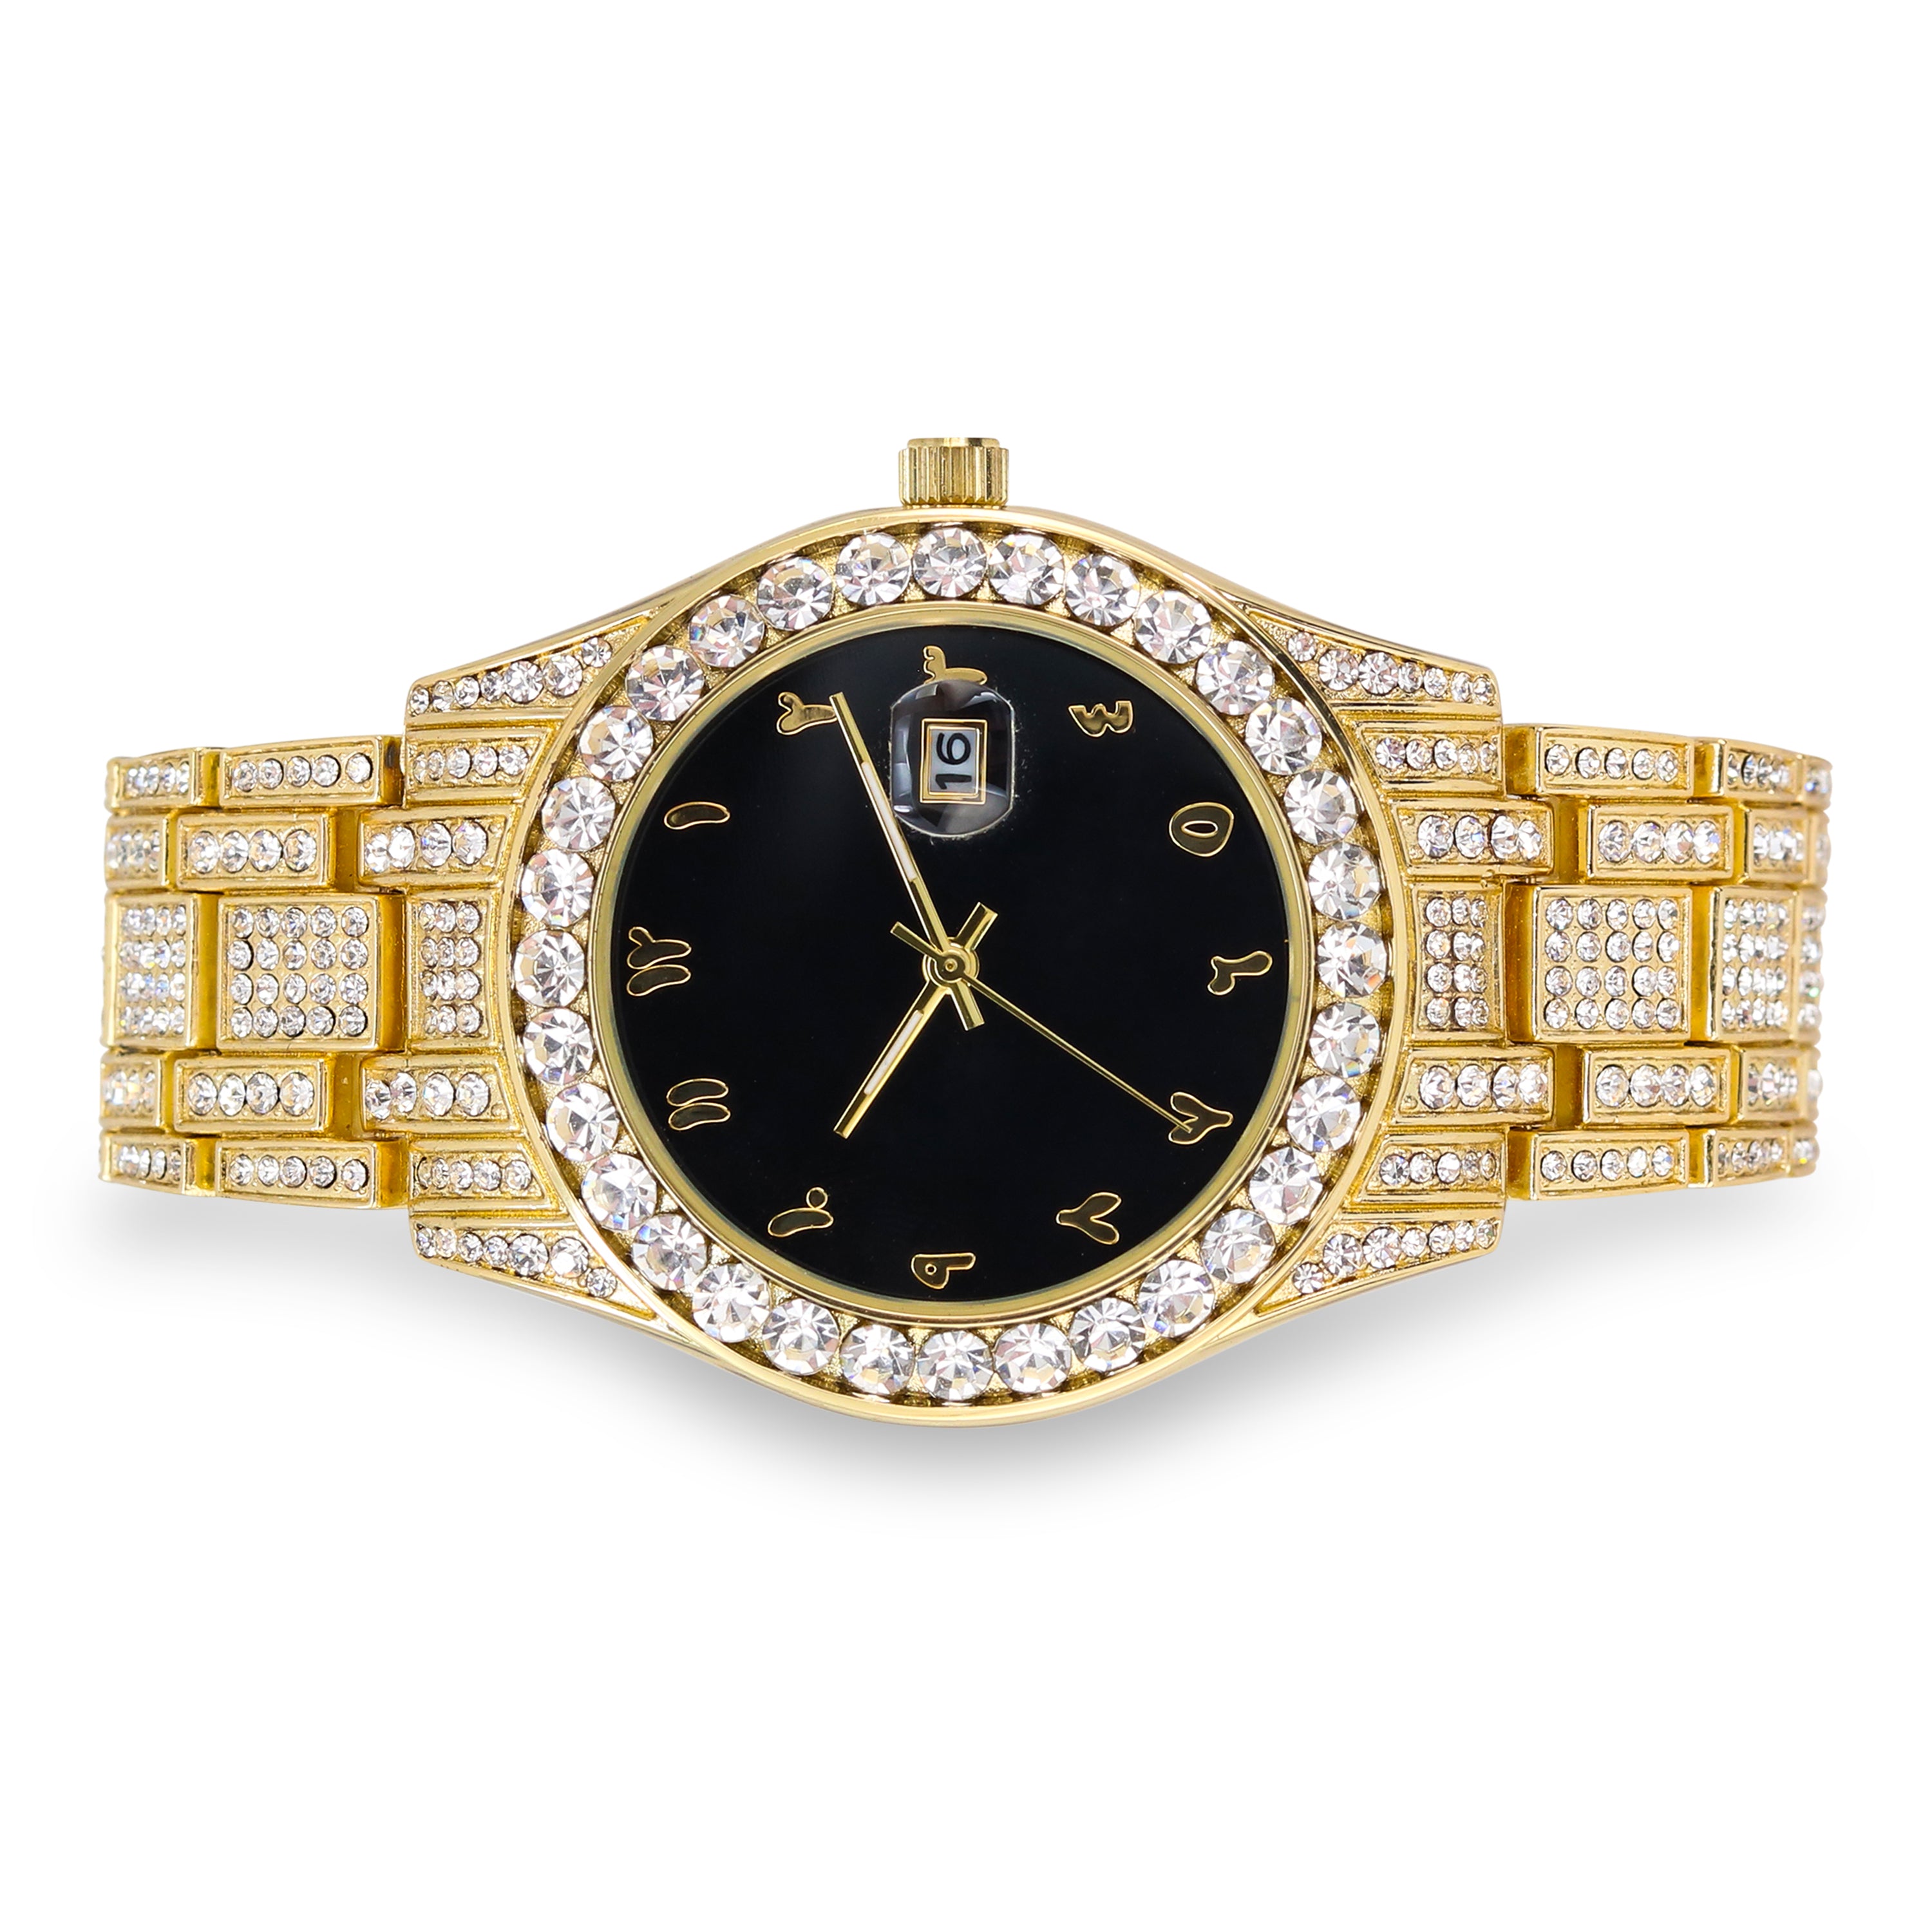 40mm Iced Out Round Arab Dial Watch Gold Black